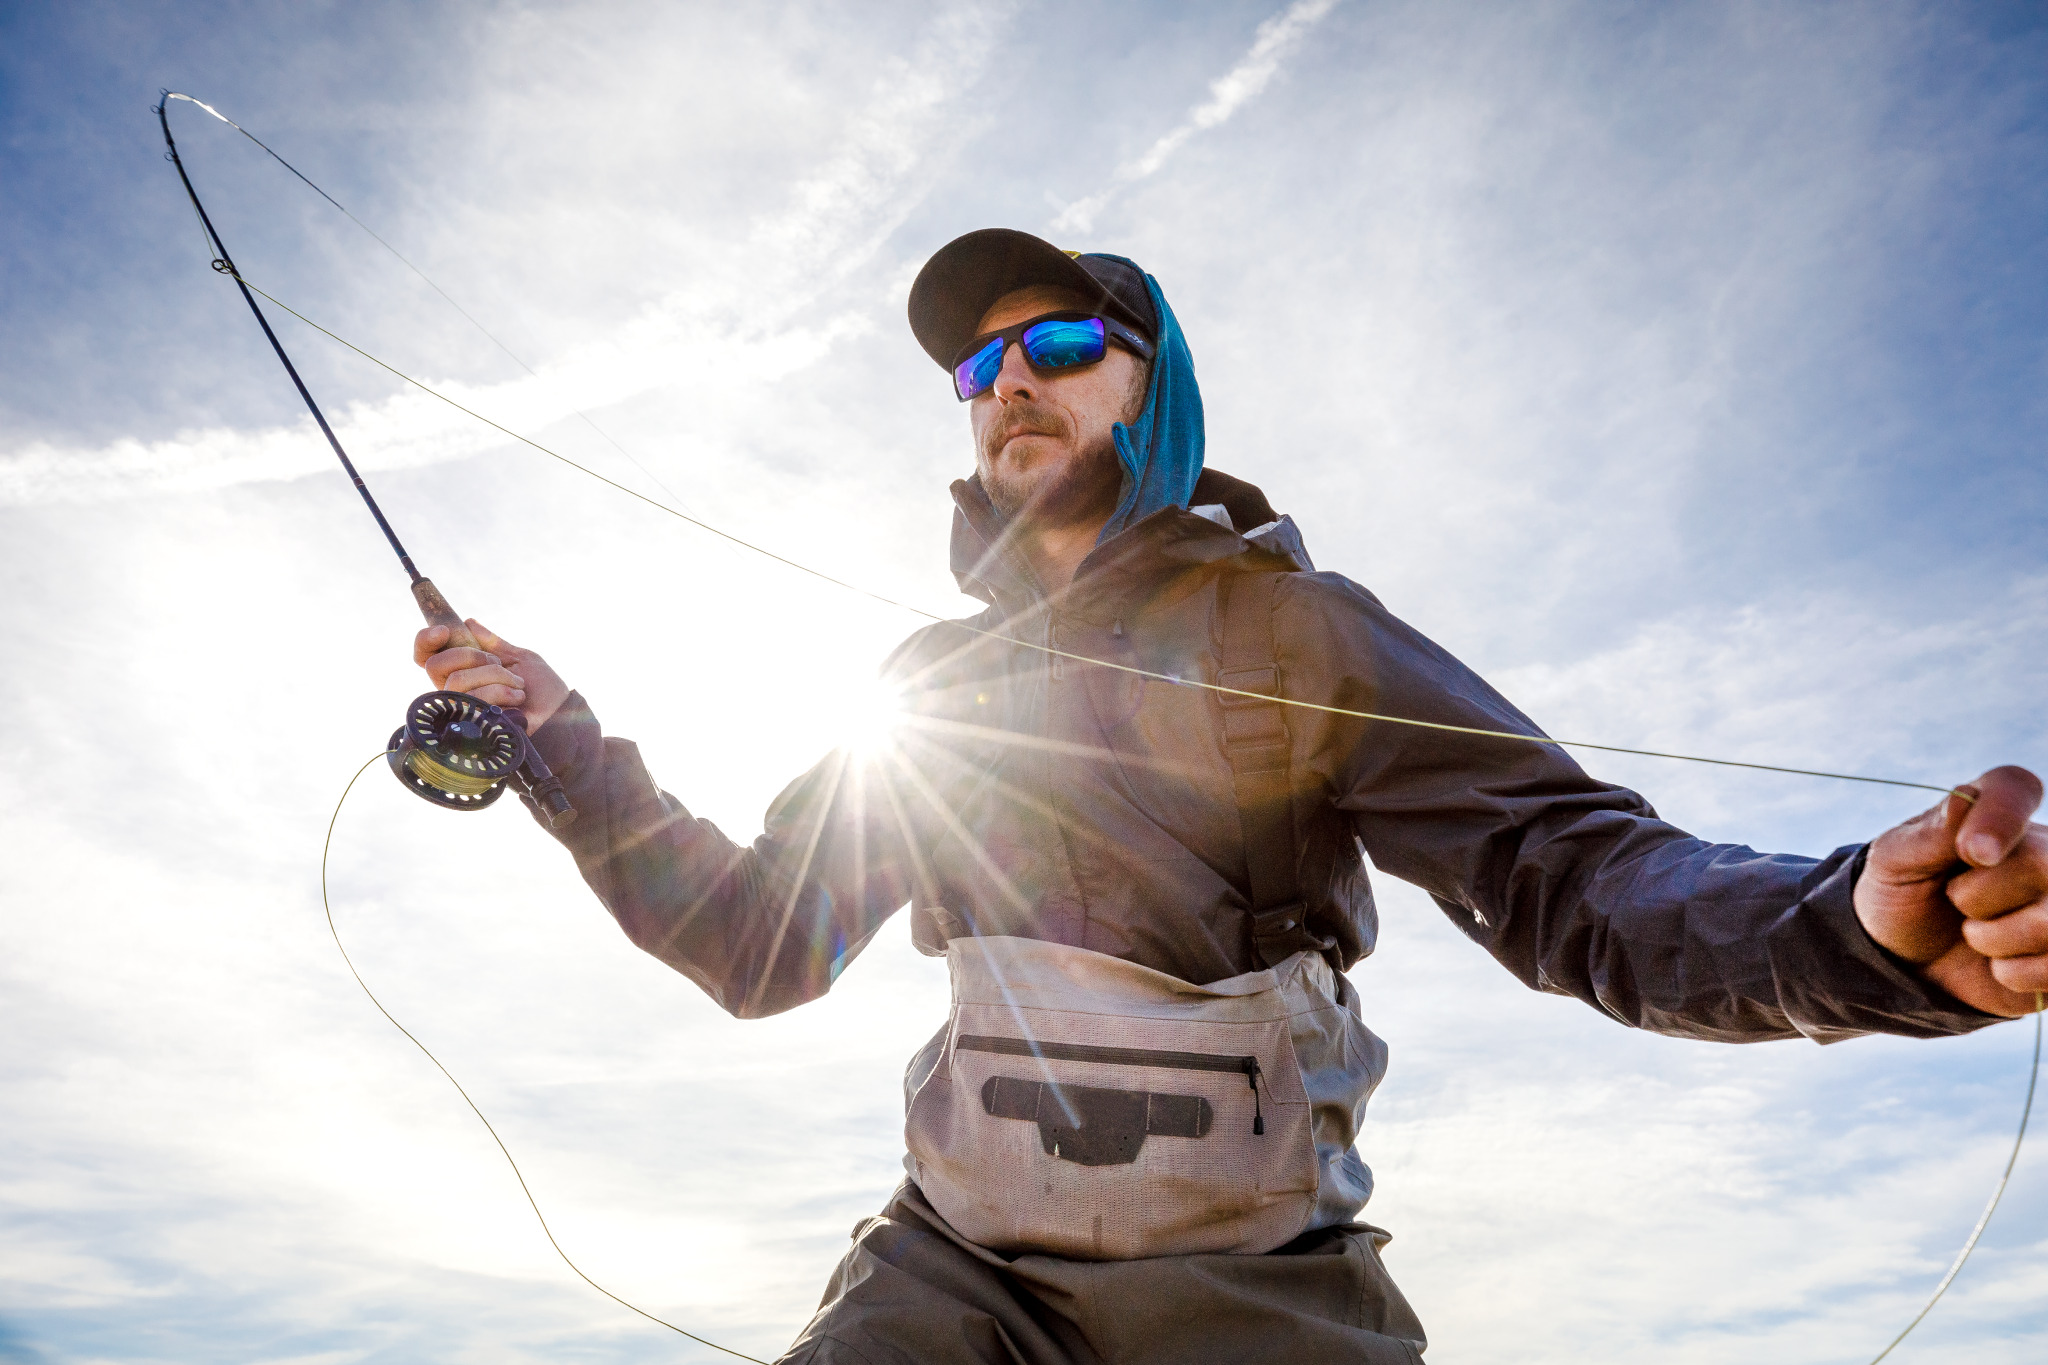 Best Polarized Sunglasses for Fishing - Buyer's Guide